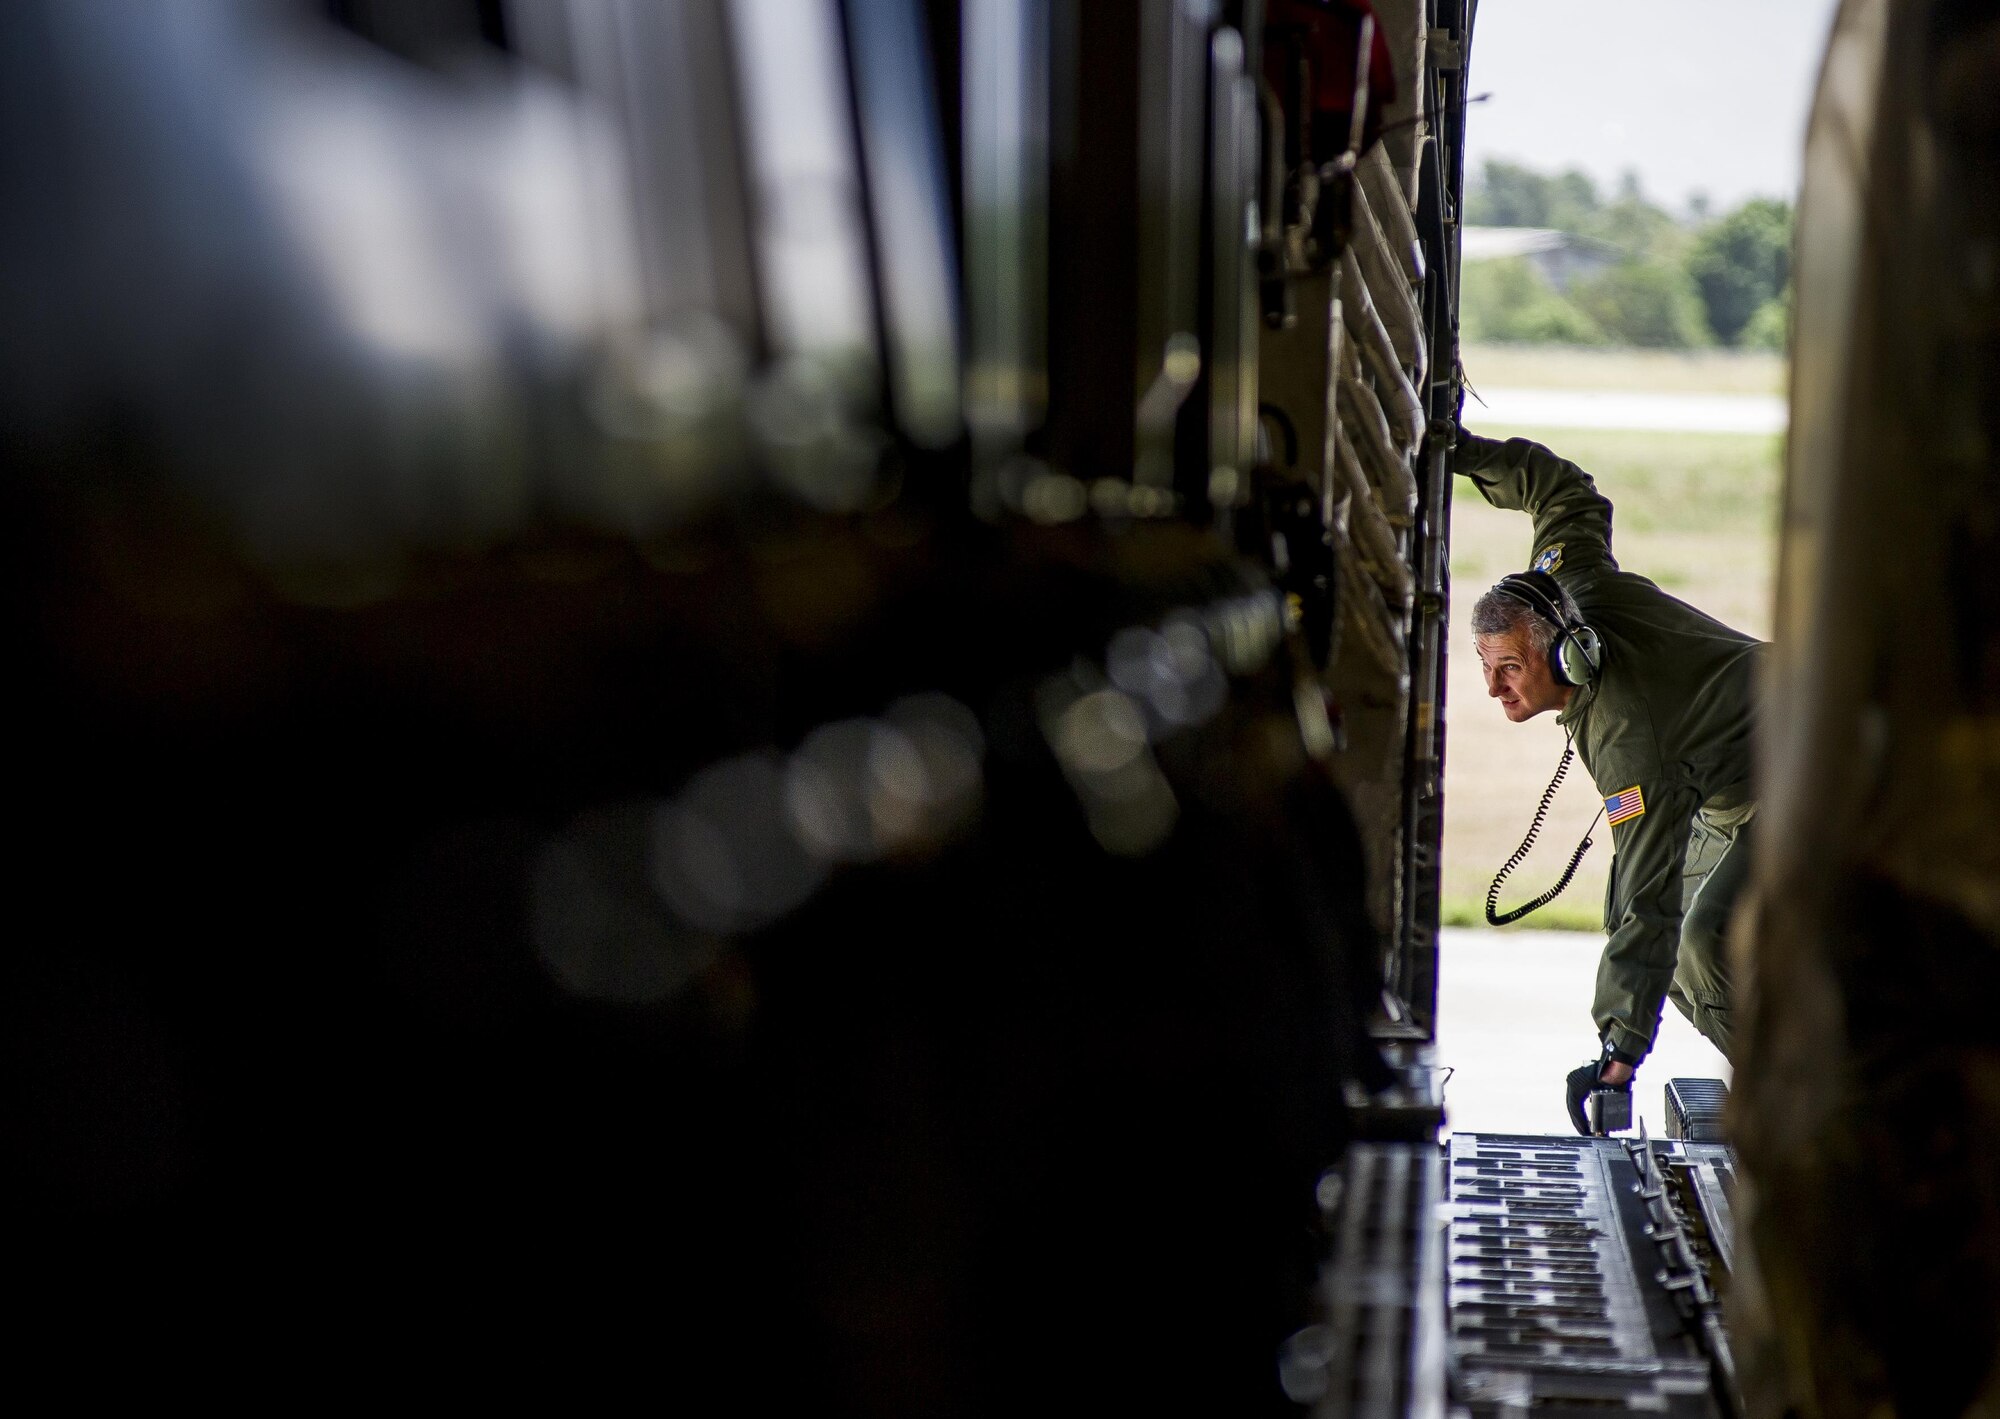 Senior Master Sgt. Randy Thigpen, 317th Airlift Squadron loadmaster, watches through the back of a C-17 Globemaster III June 13, 2015, as it taxis into position in Port Di Prince, Haiti. The 317th AS delivered more than 65,000 pounds of food to the civilians of Haiti, then continued their mission to Saint Kitts and Nevis and provided bicycles, school and medical supplies. (U.S. Air Force photo / Senior Airman Tom Brading)